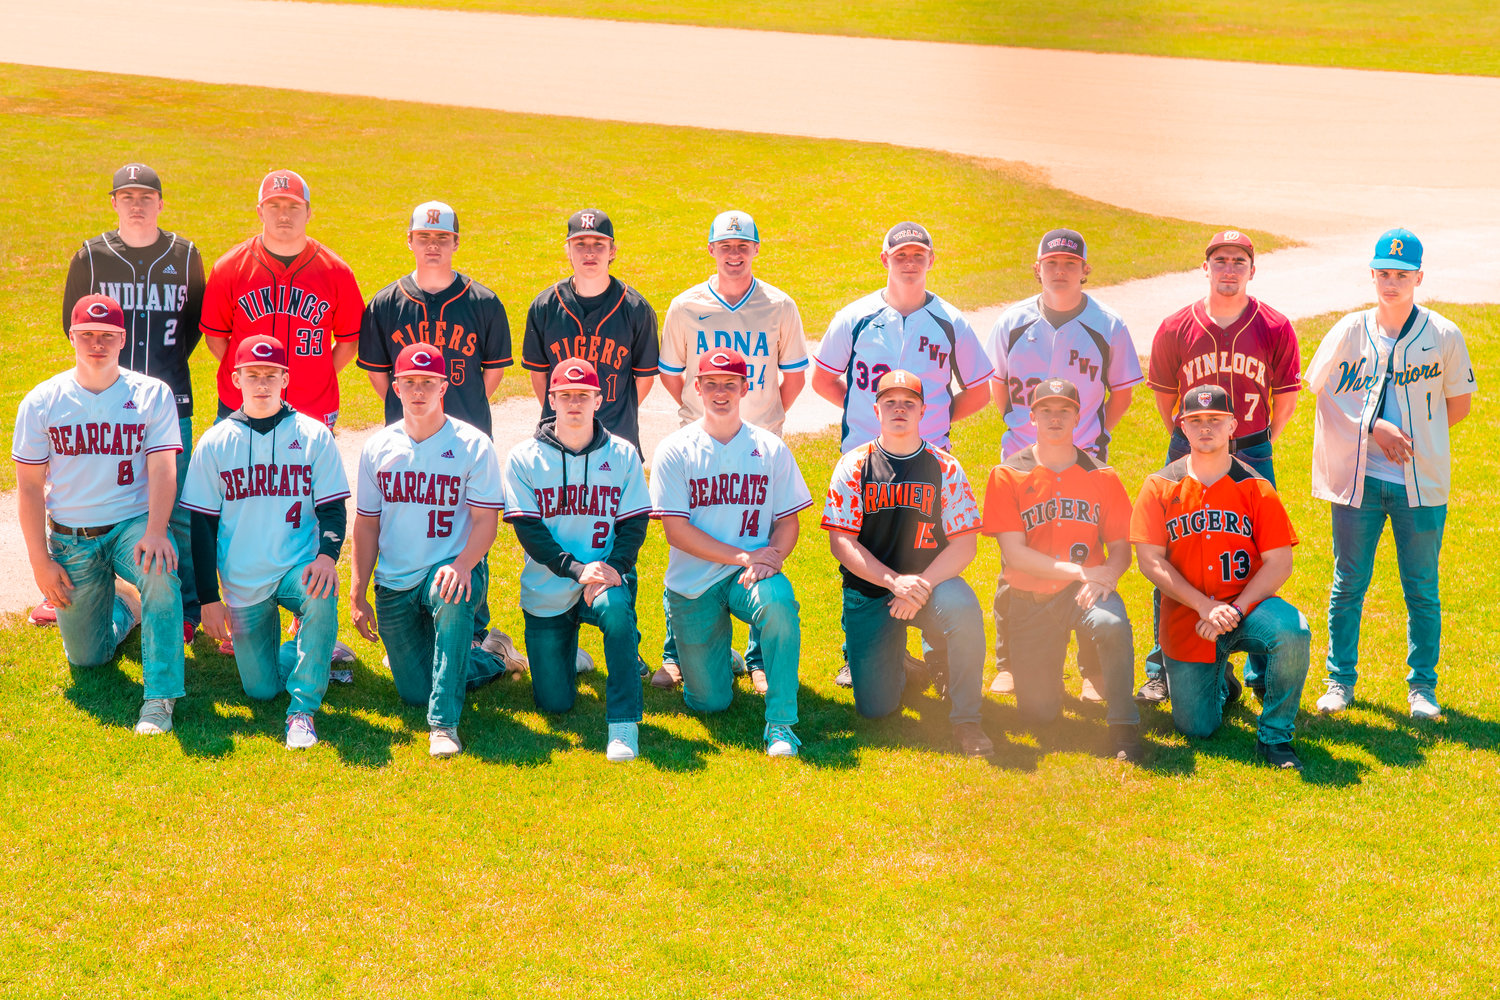 The All-Area Baseball team poses for a photo at Wheeler Field in Centralia on Sunday.